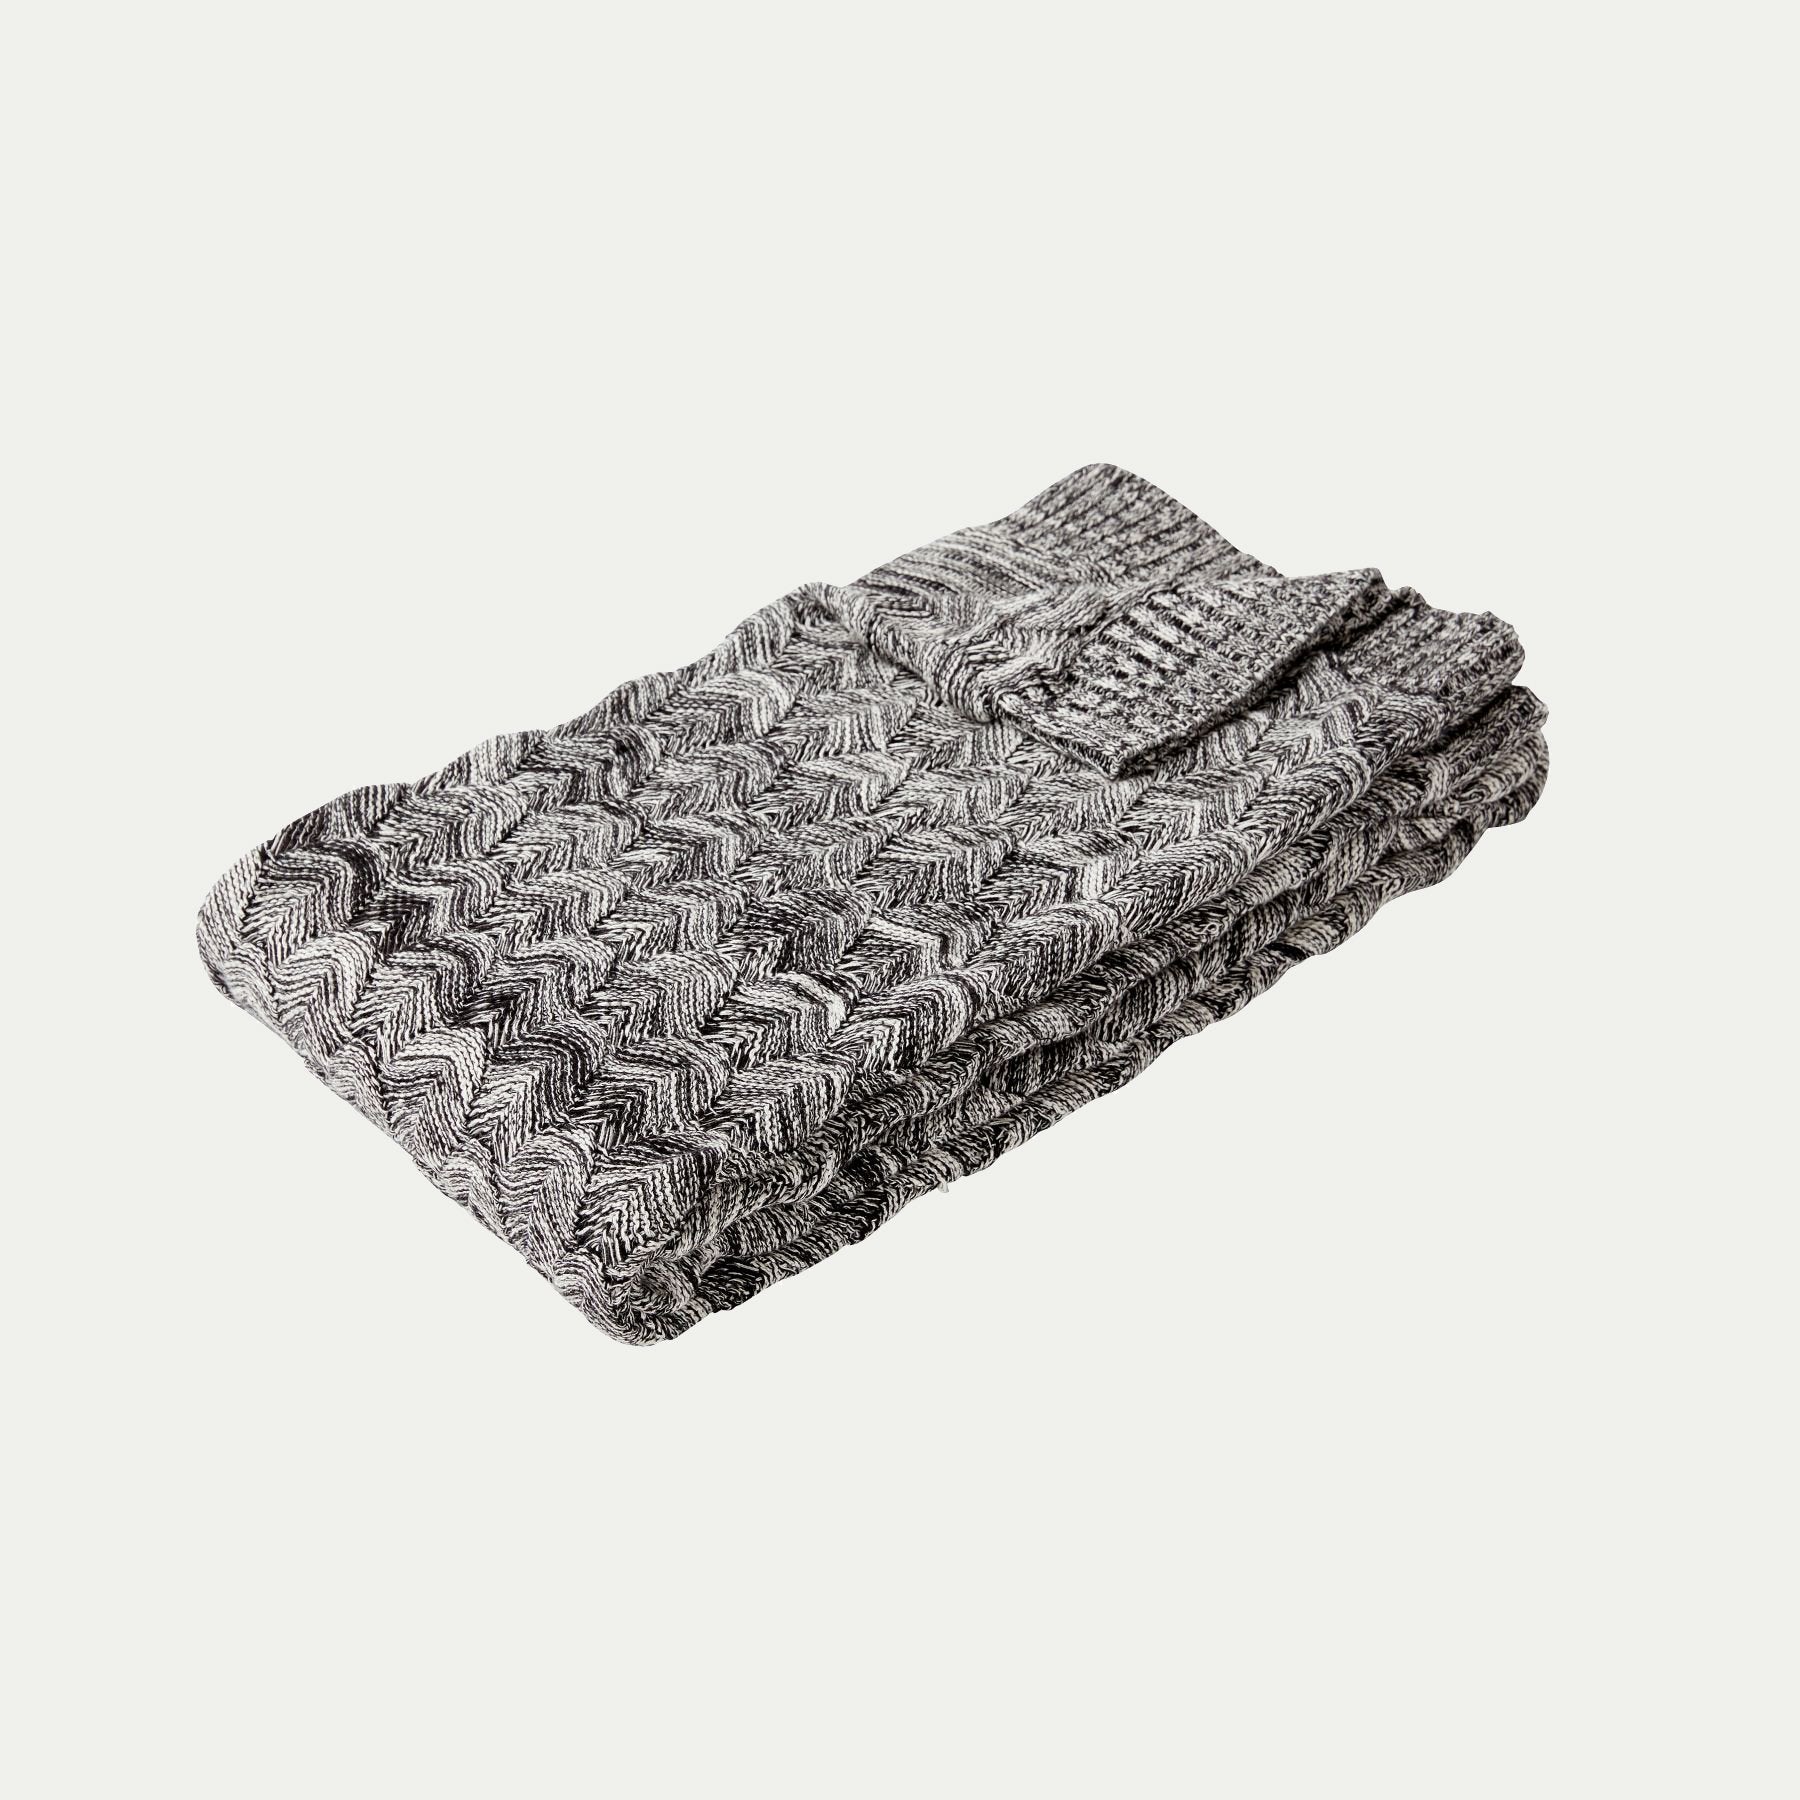 Hubsch Interior large cotton scale knit throw blanket in charcoal grey and cream on white background